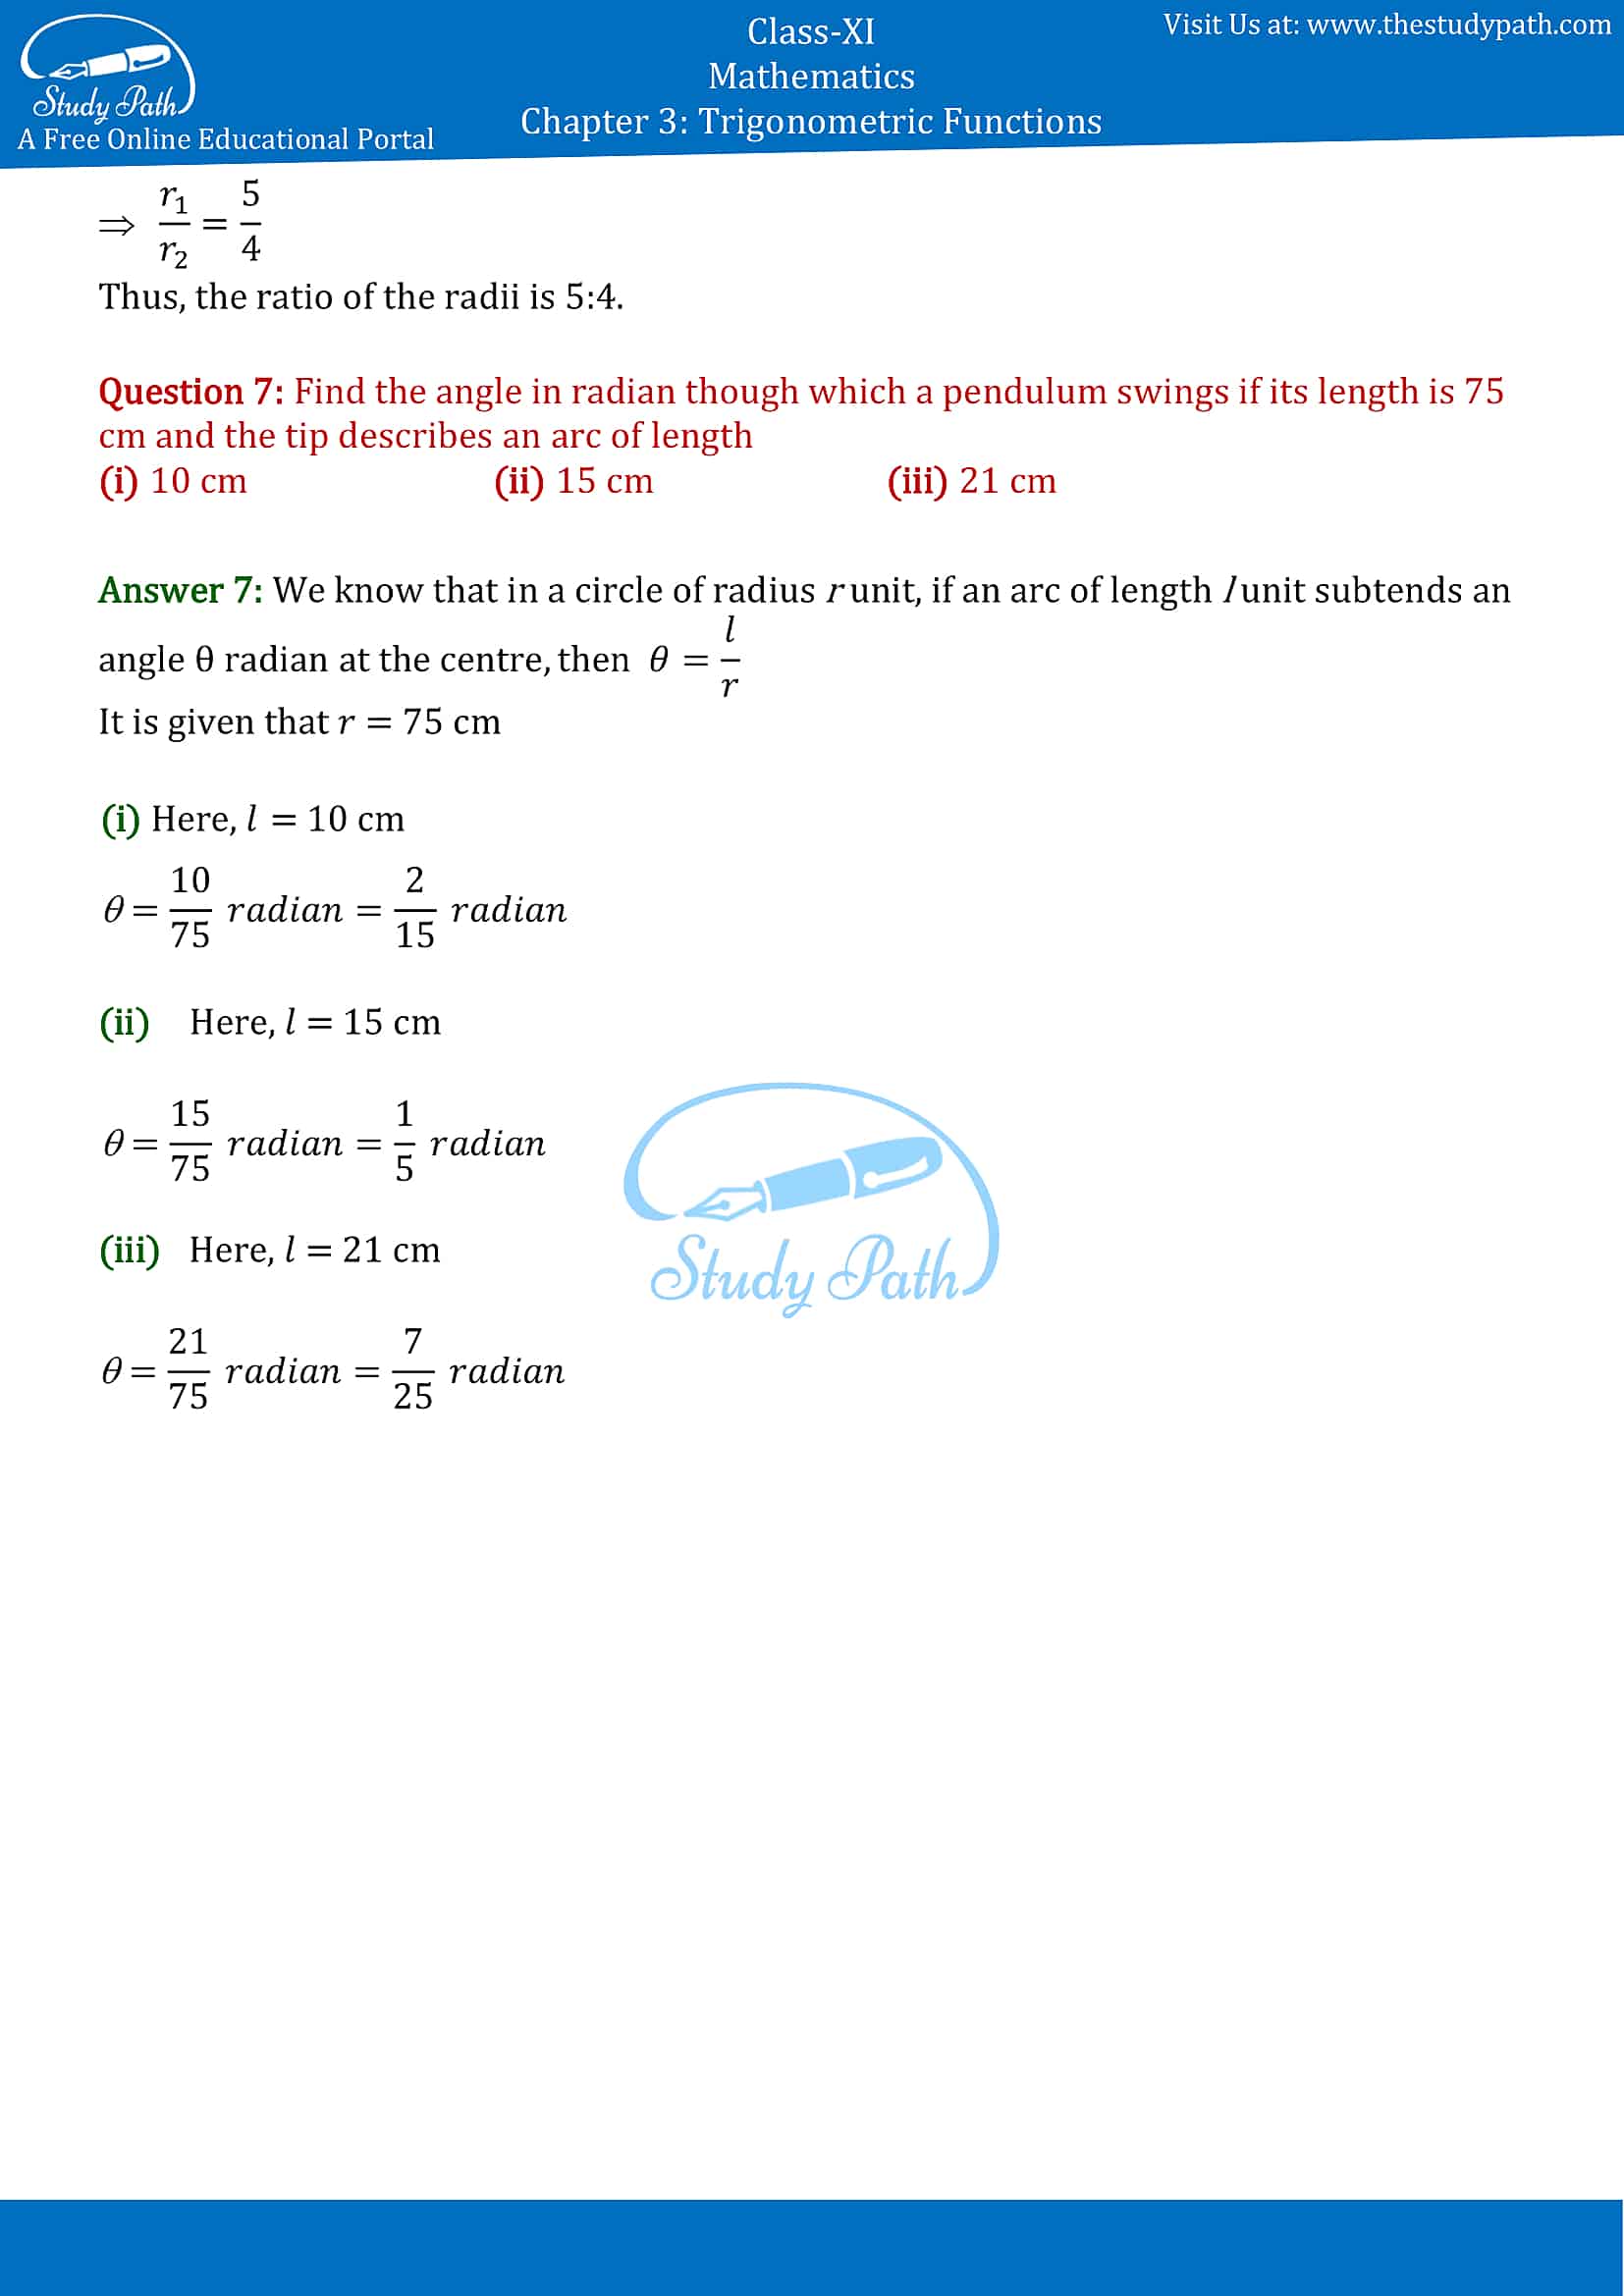 NCERT Solutions for Class 11 Maths Chapter 3 Trigonometric Functions Exercise 3.1